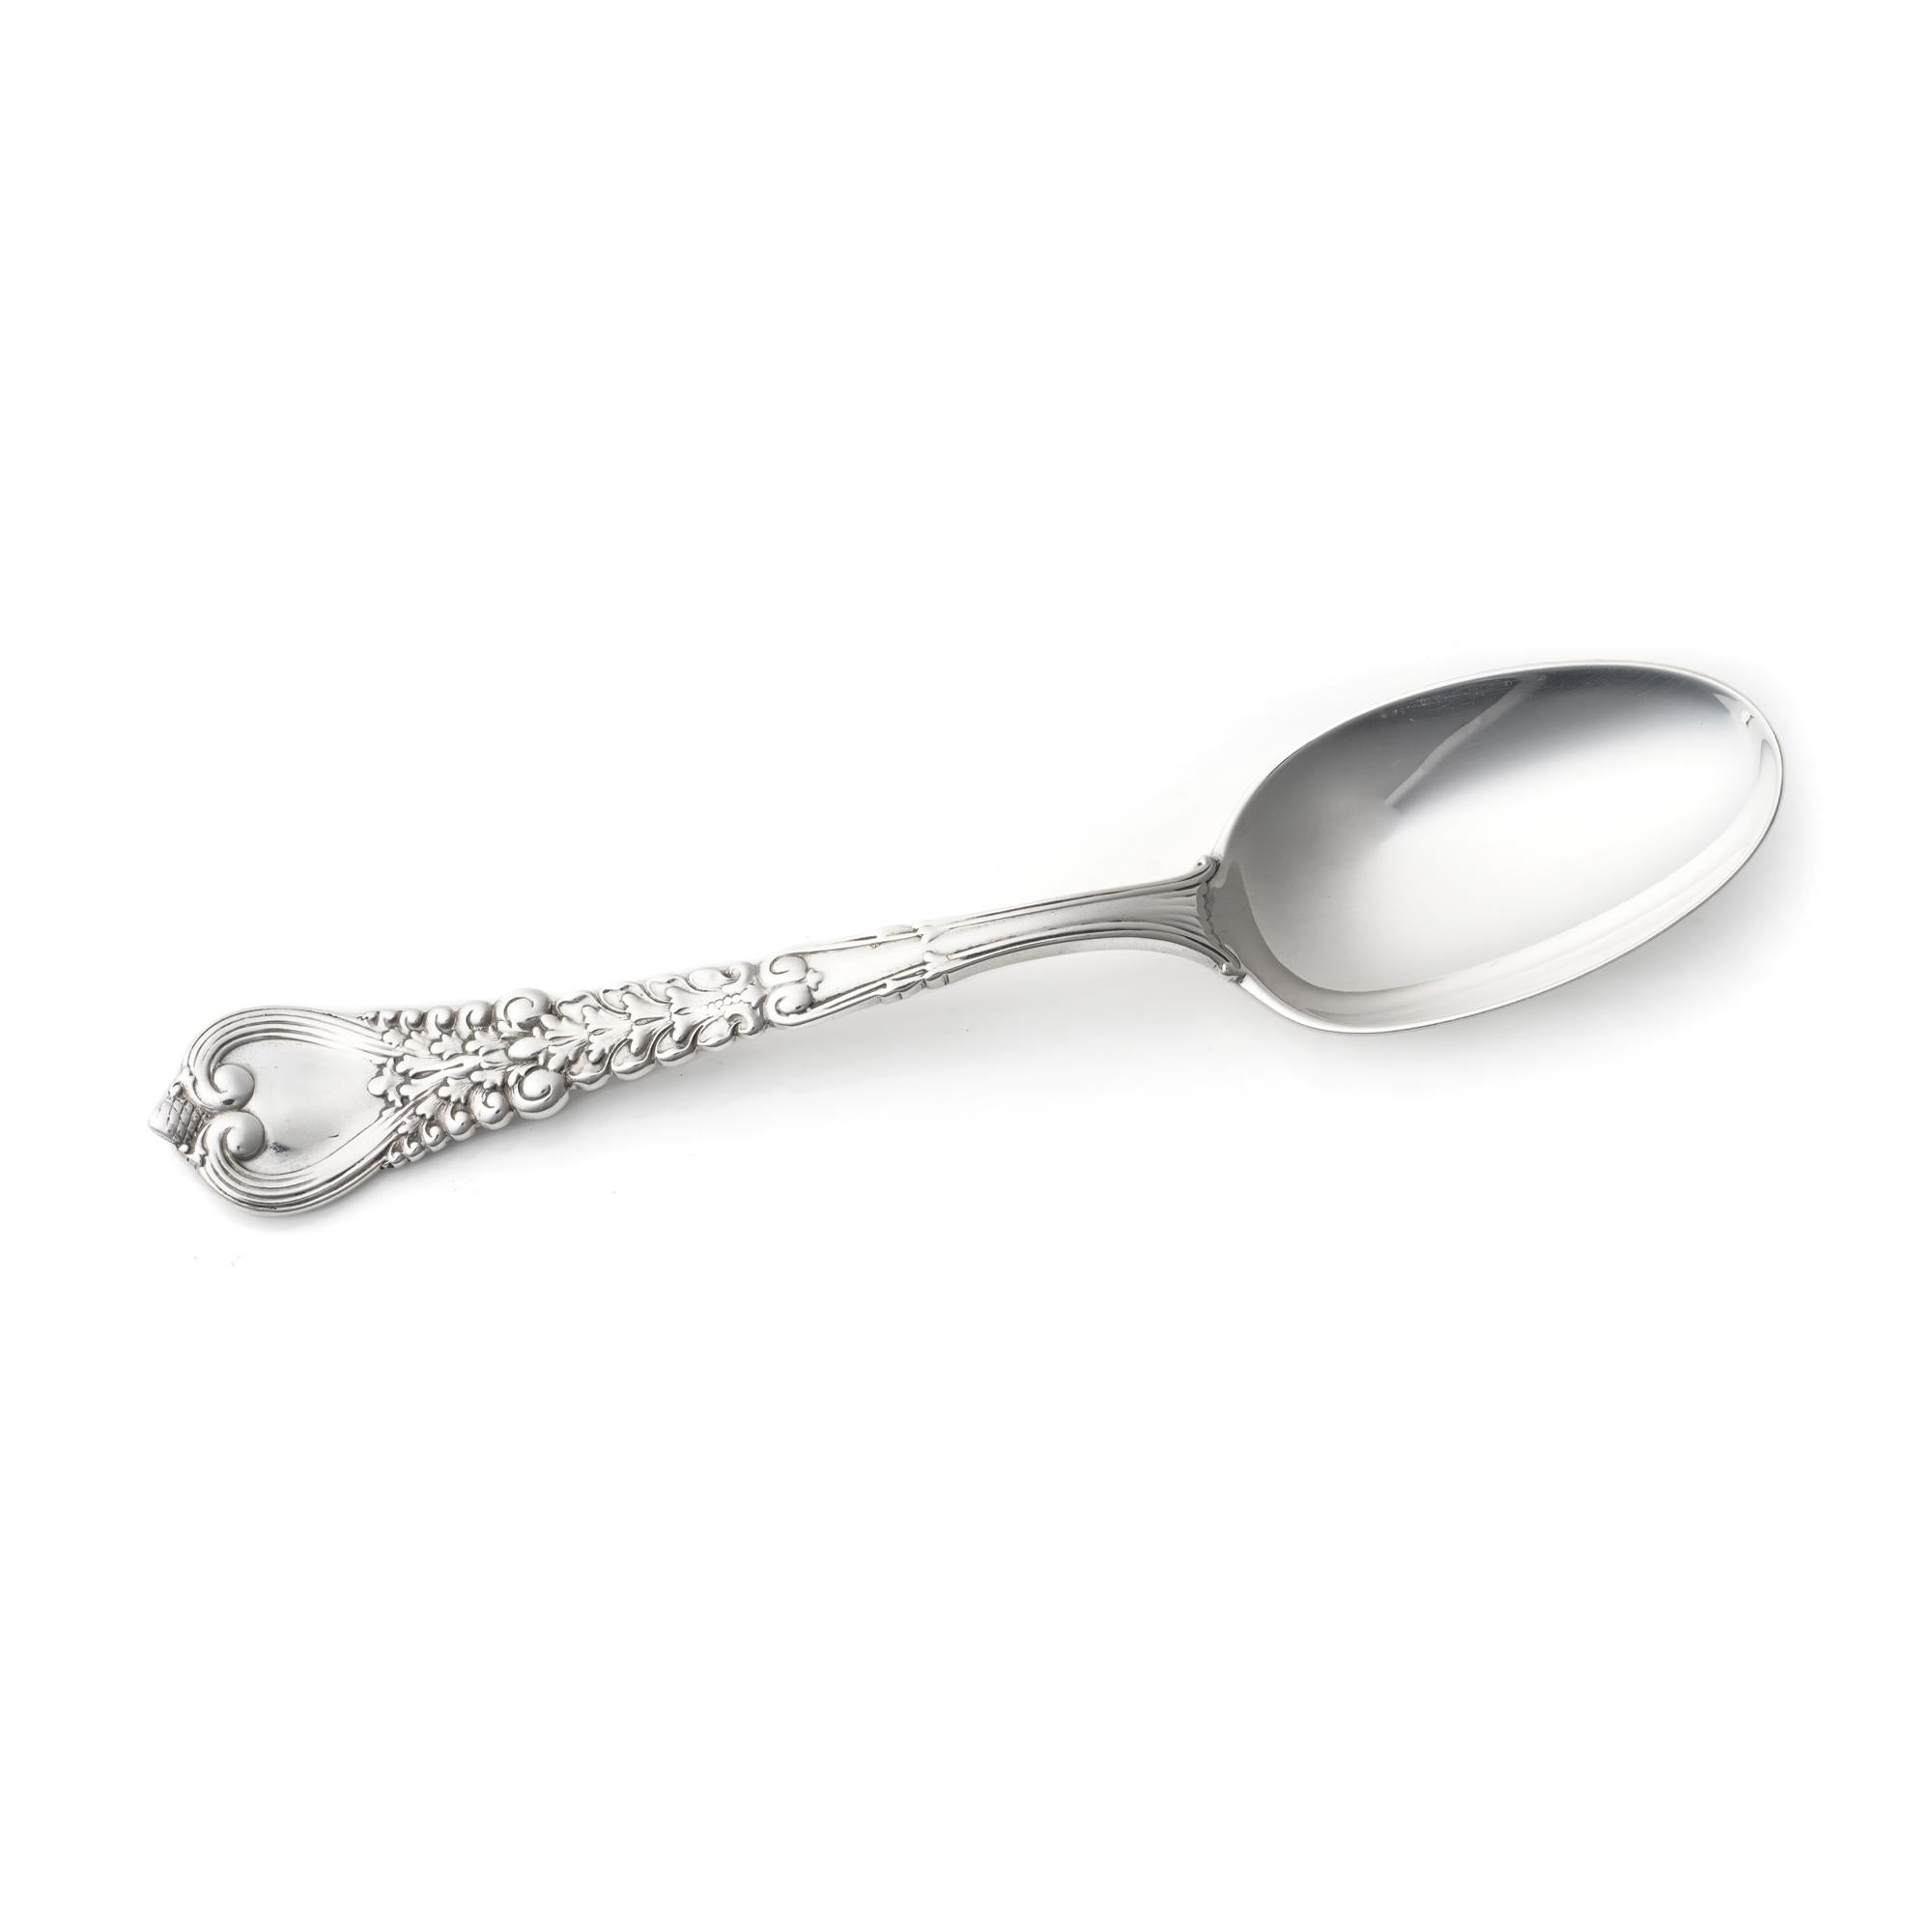 American Antique Tiffany & Co. Sterling Silver Florentine Pattern Teaspoon For Sale